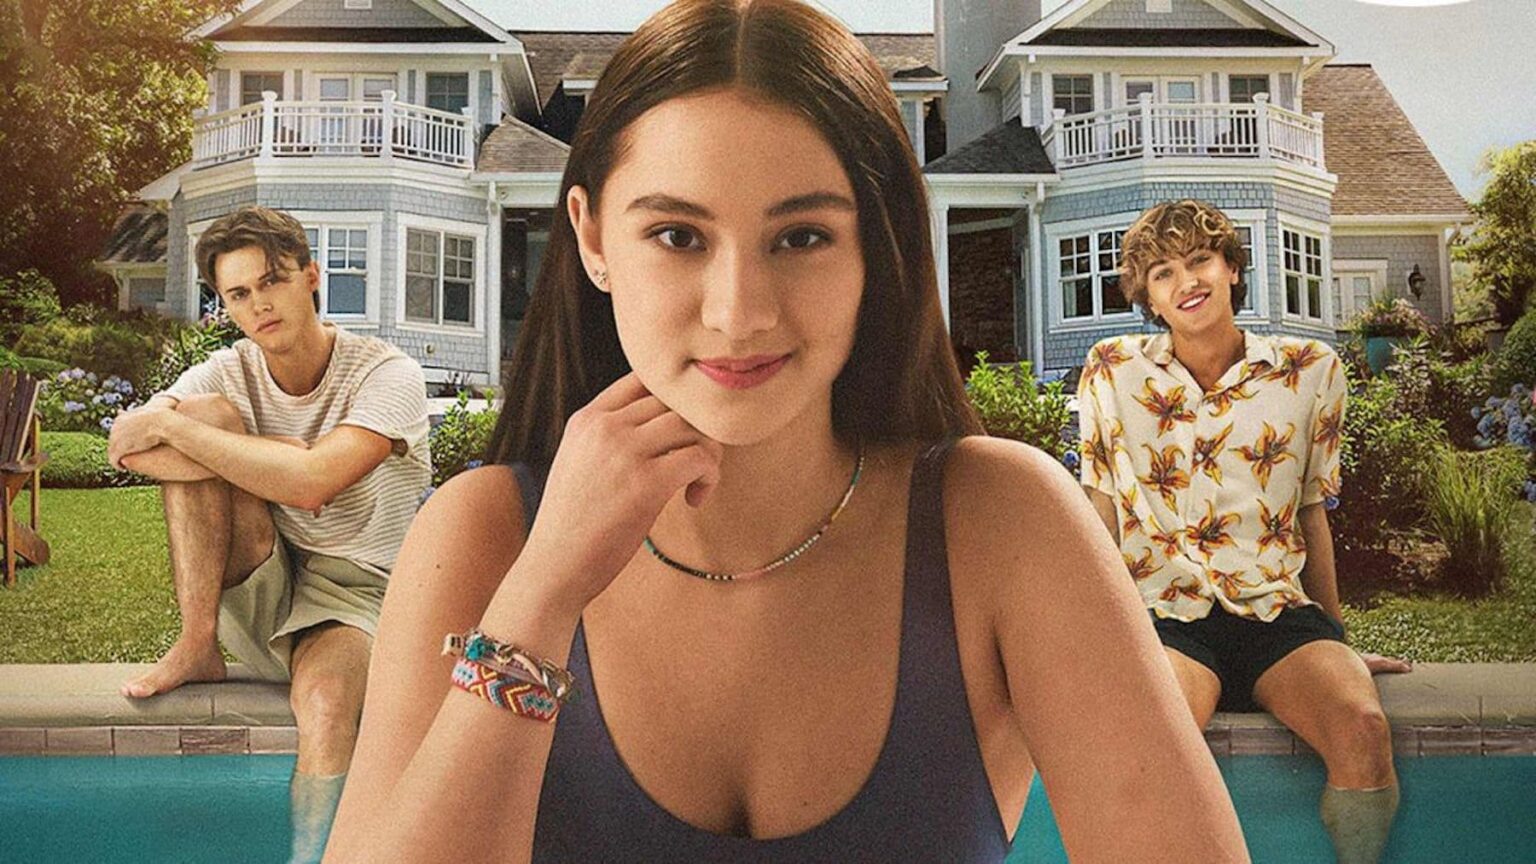 Amazon had an easy winner on their hands with 'The Summer I Turned Pretty'. Can we expect season 2 anytime soon? Find out all the details here.